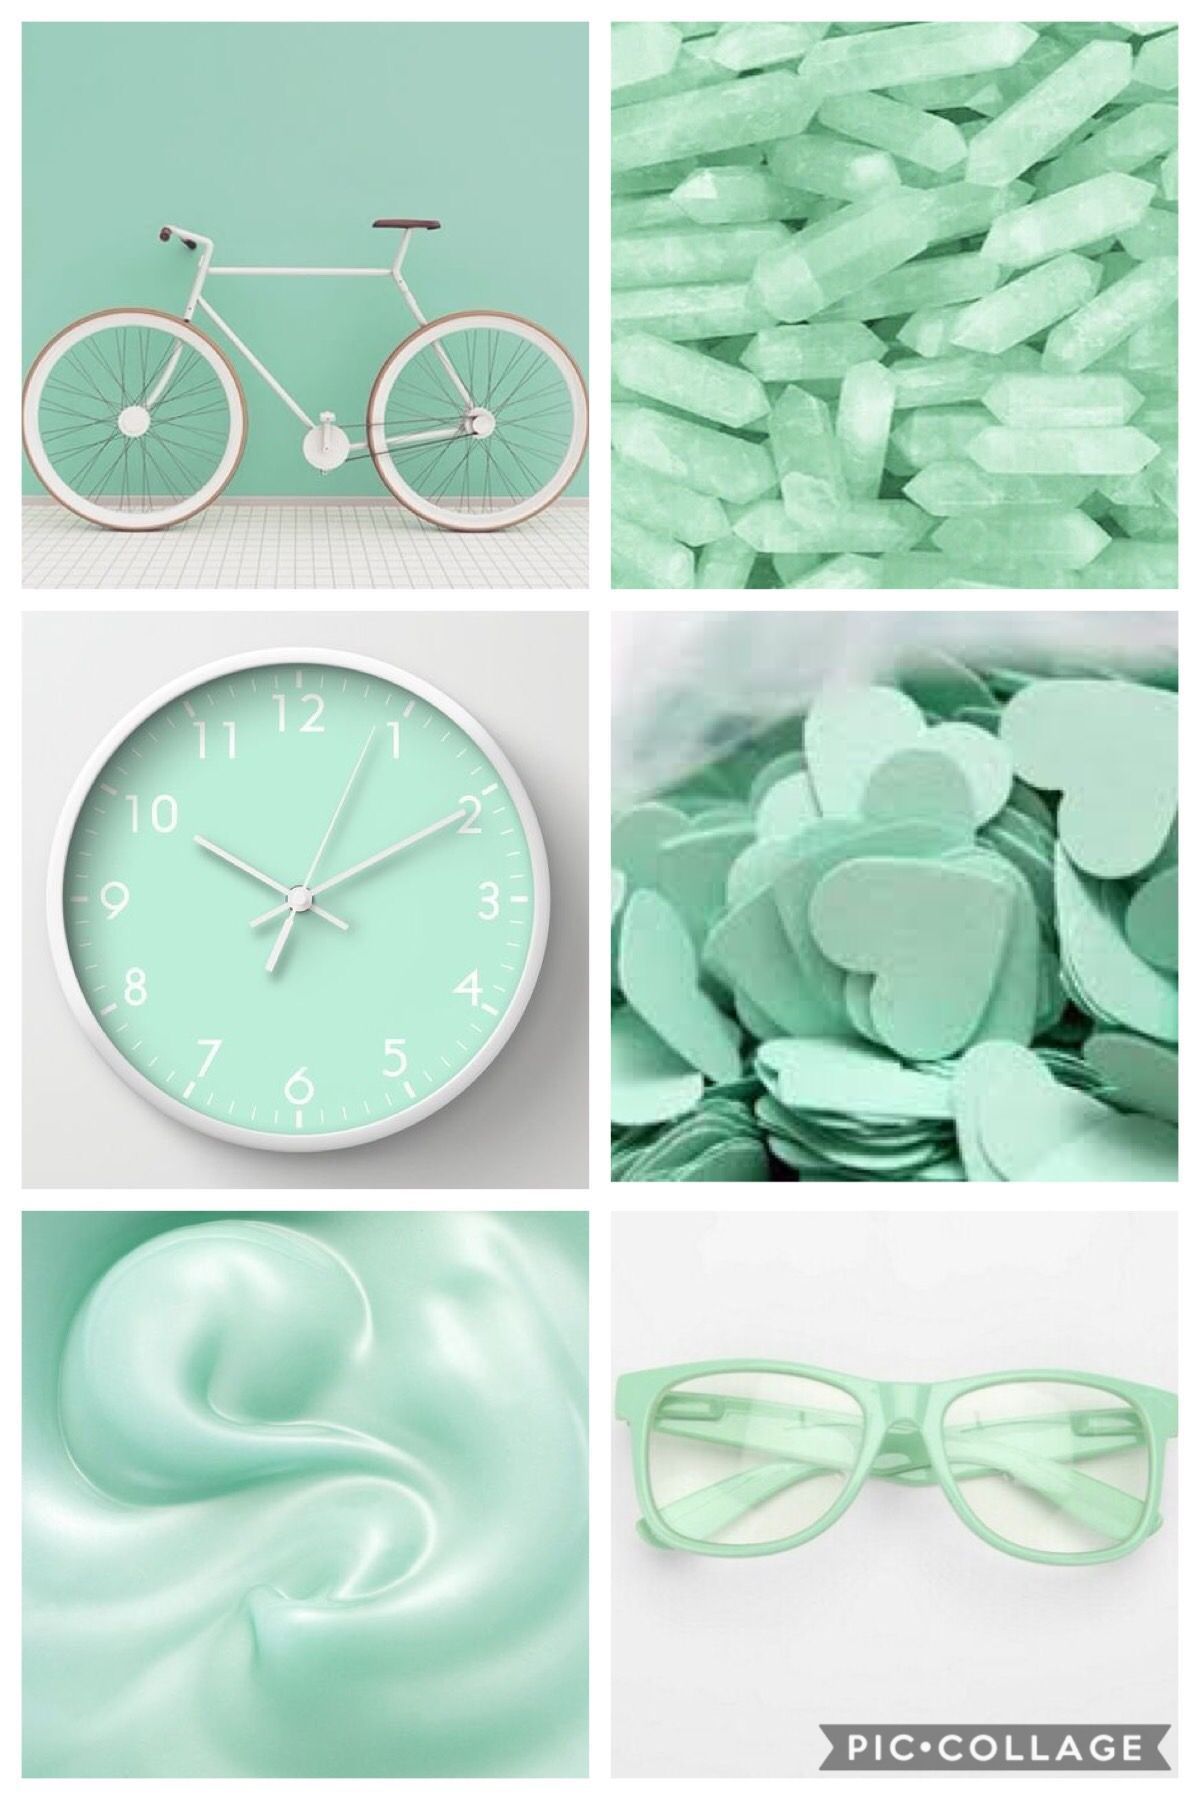 10 Selected wallpaper aesthetic light green You Can Use It For Free ...